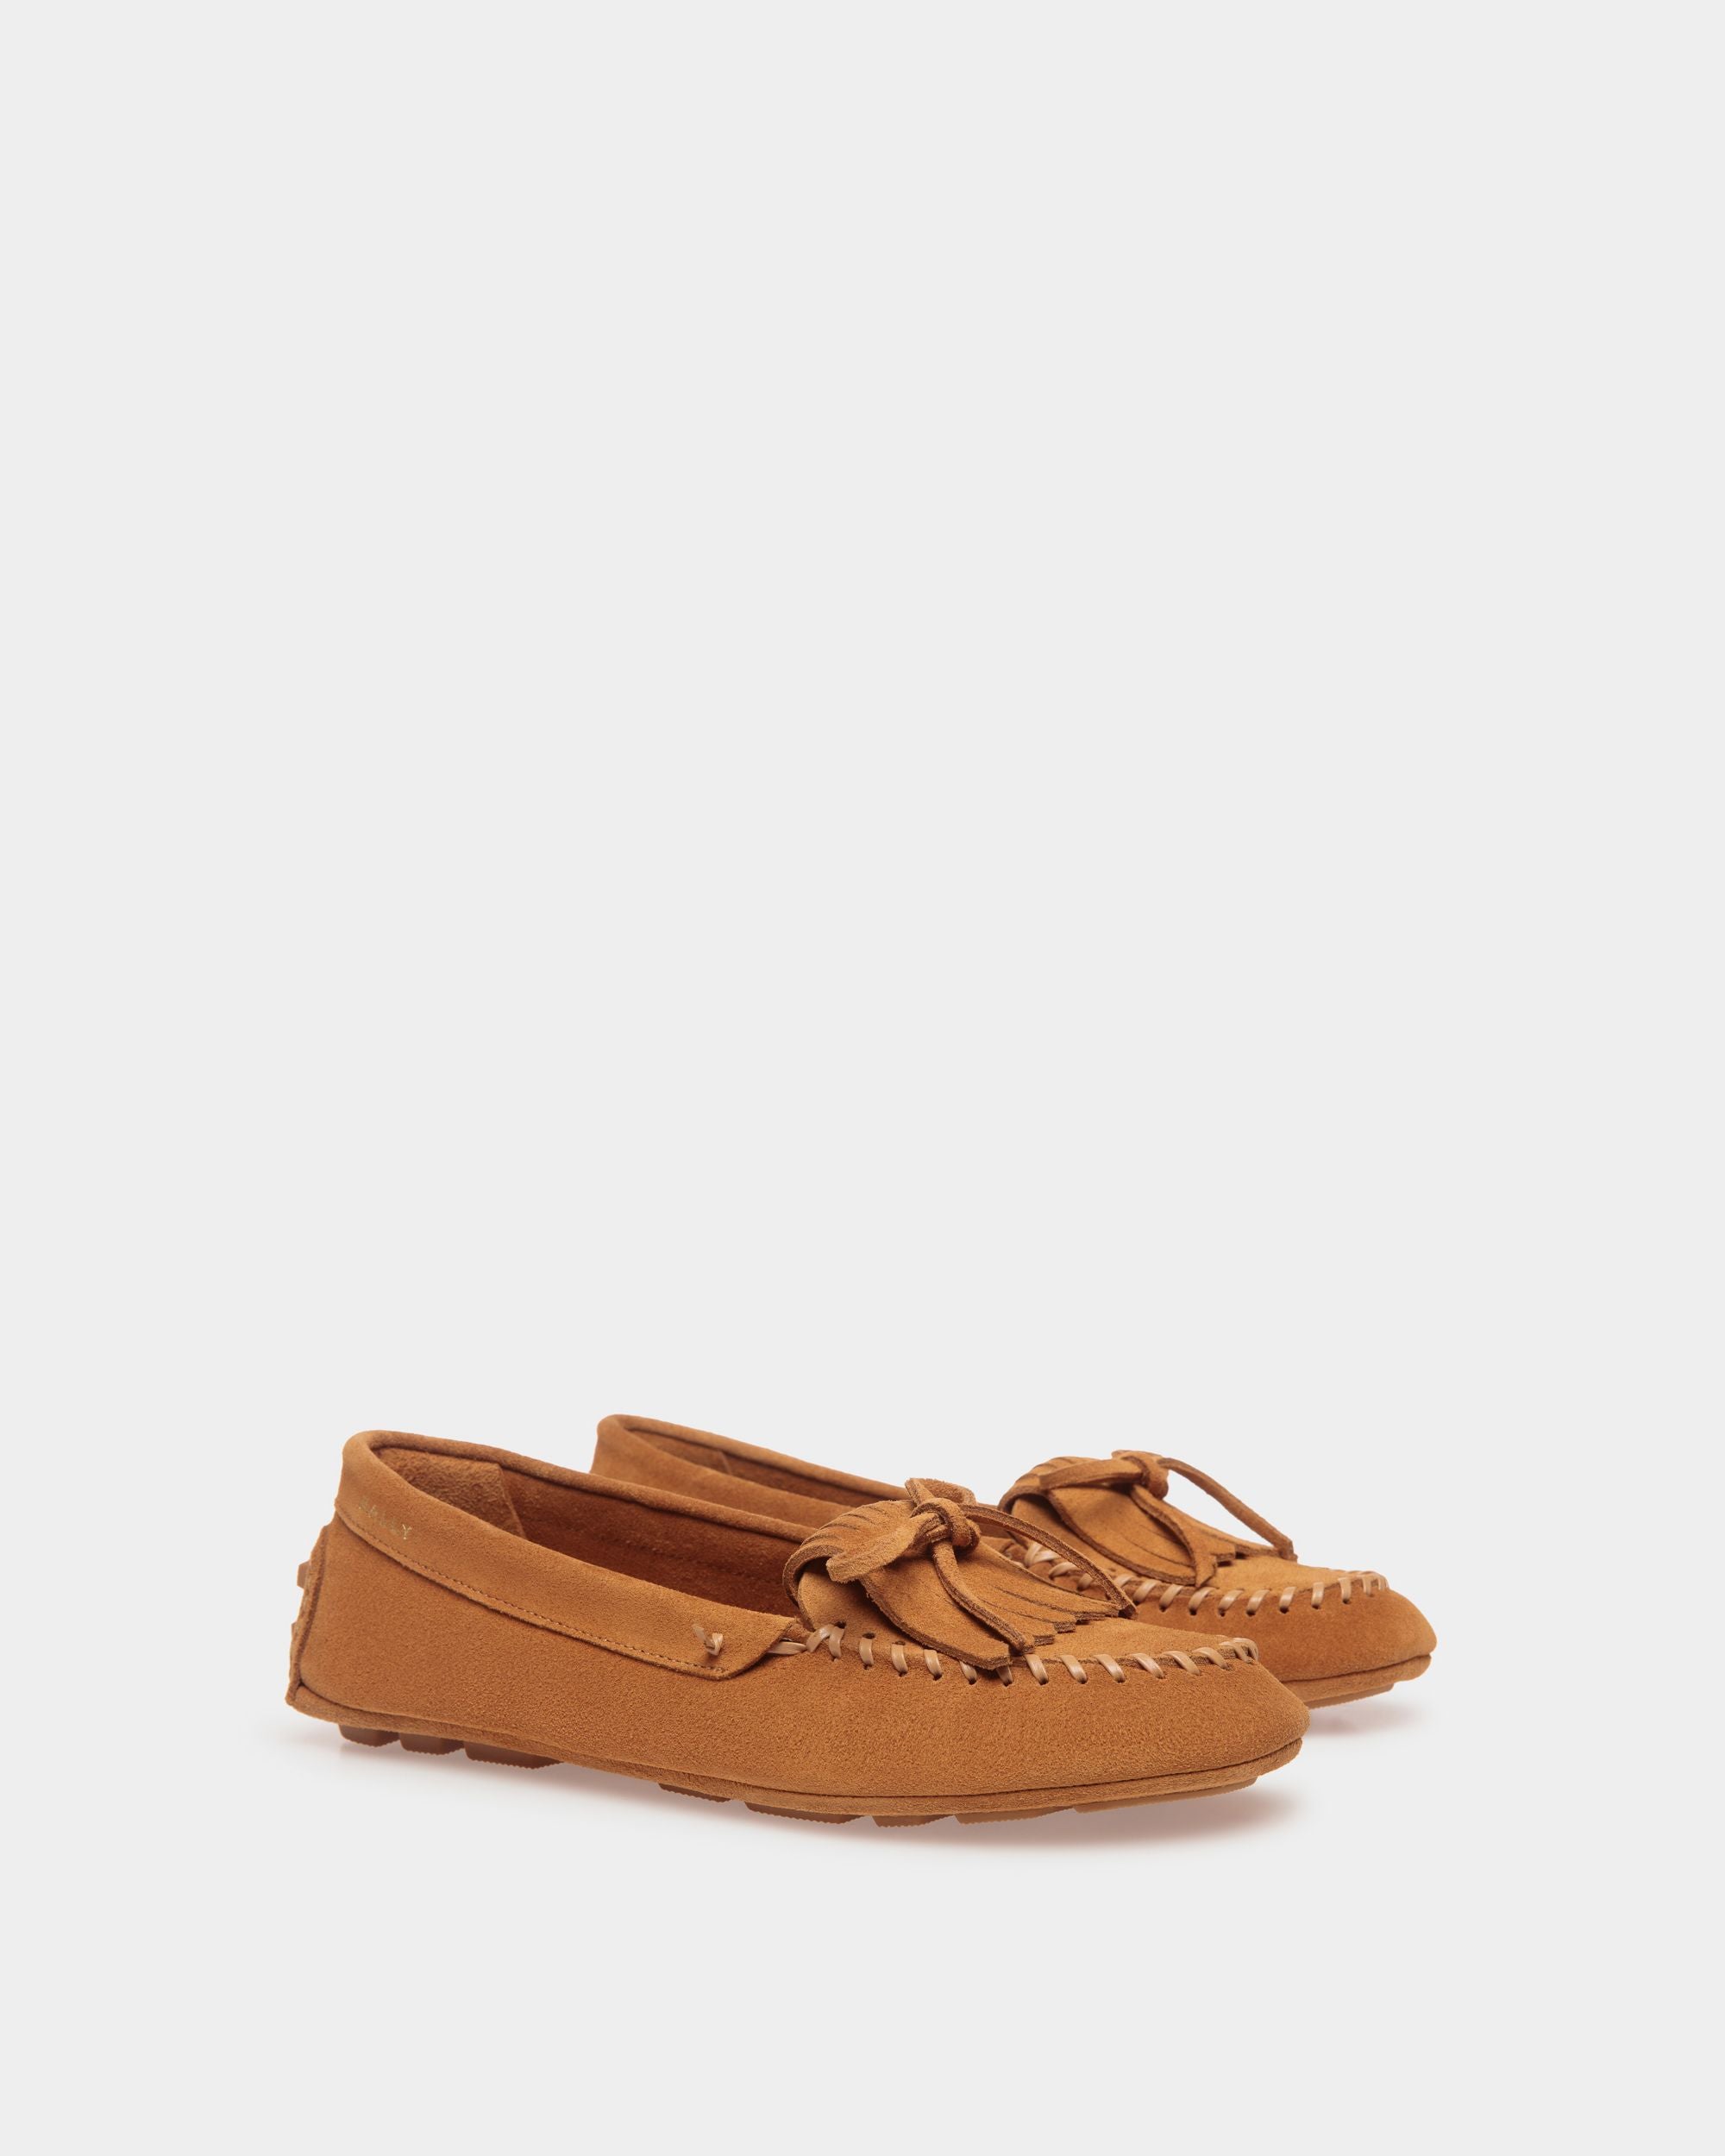 Kerbs | Women's Driver in Brown Suede | Bally | Still Life 3/4 Front